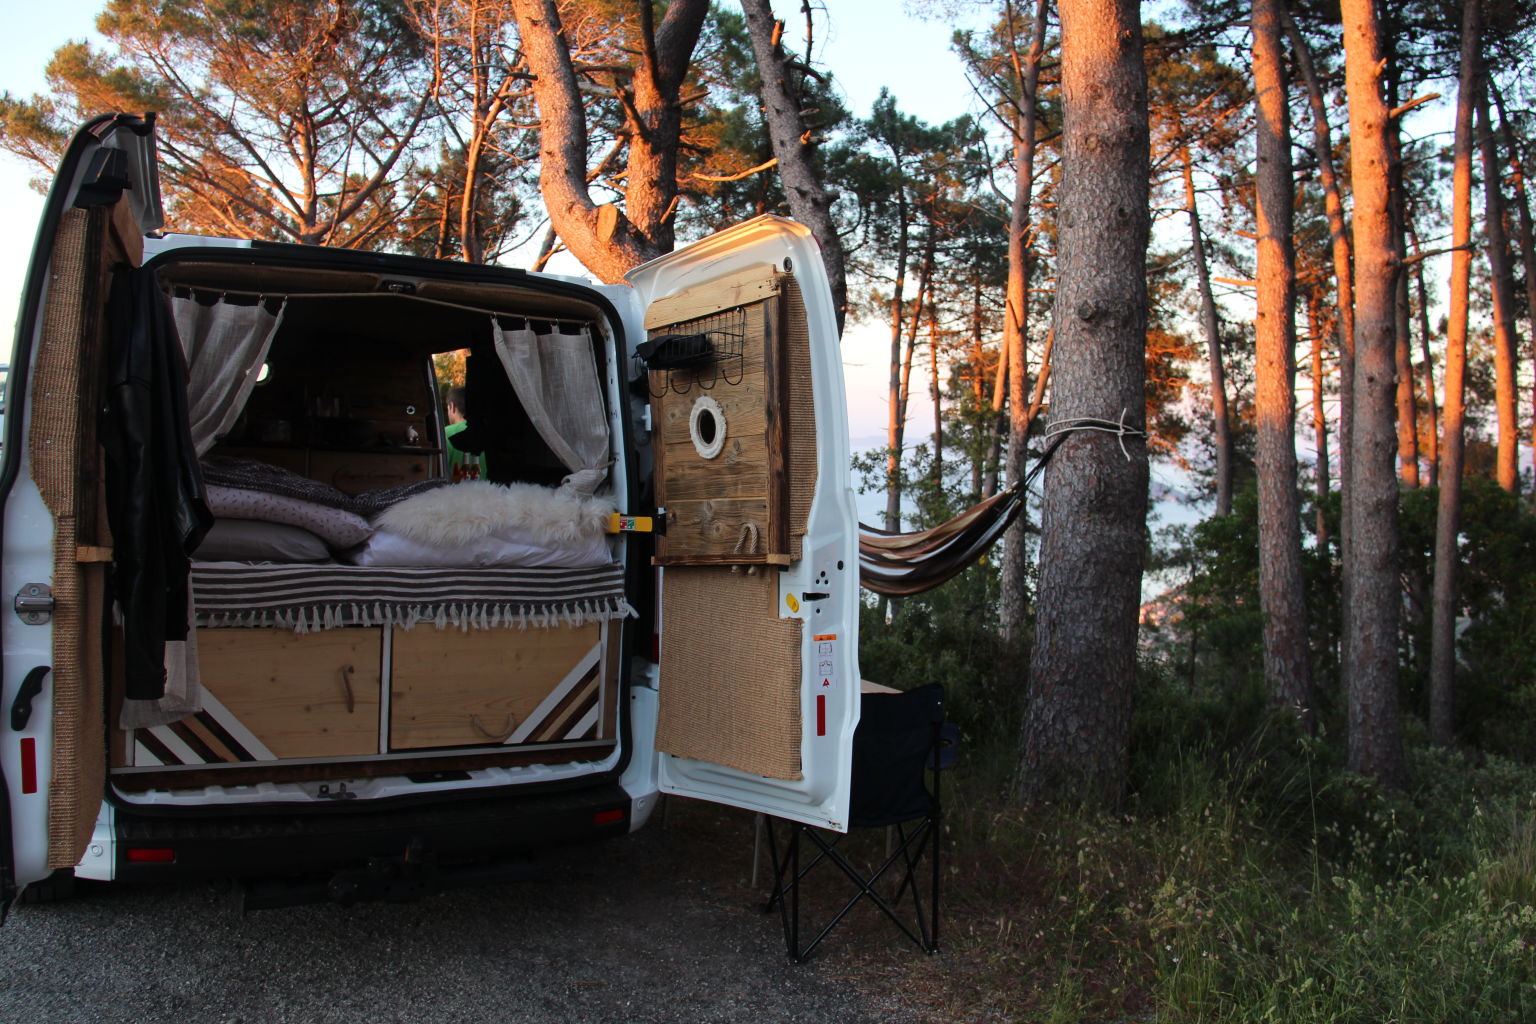 Renovated van in front of a forest at nightfall